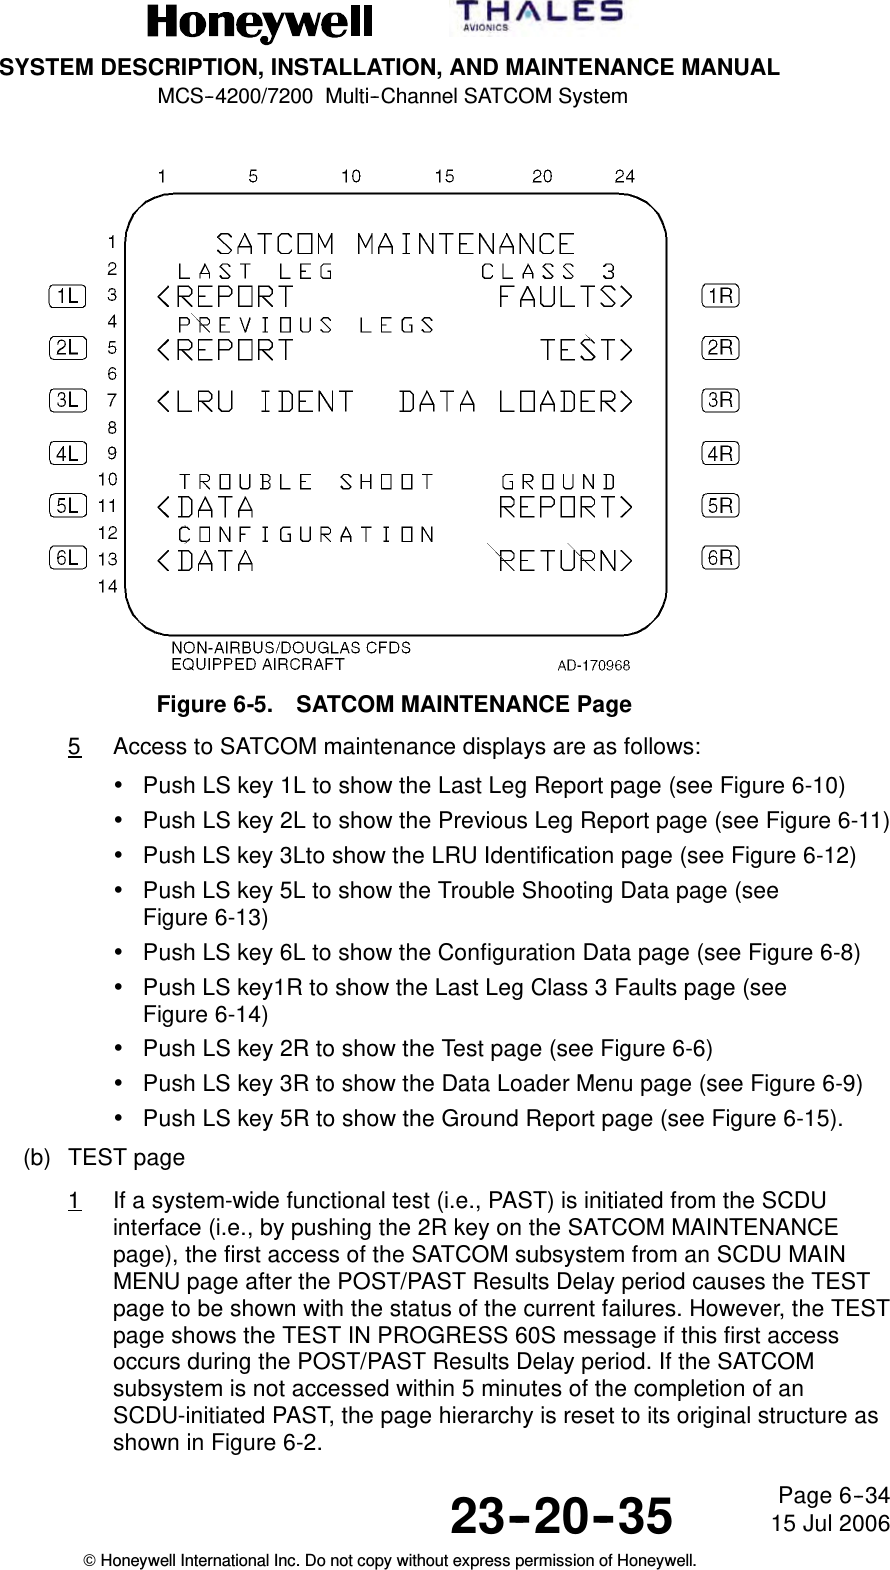 SYSTEM DESCRIPTION, INSTALLATION, AND MAINTENANCE MANUALMCS--4200/7200 Multi--Channel SATCOM System23--20--35 15 Jul 2006Honeywell International Inc. Do not copy without express permission of Honeywell.Page 6--34Figure 6-5. SATCOM MAINTENANCE Page5Access to SATCOM maintenance displays are as follows:•Push LS key 1L to show the Last Leg Report page (see Figure 6-10)•Push LS key 2L to show the Previous Leg Report page (see Figure 6-11)•Push LS key 3Lto show the LRU Identification page (see Figure 6-12)•Push LS key 5L to show the Trouble Shooting Data page (seeFigure 6-13)•Push LS key 6L to show the Configuration Data page (see Figure 6-8)•Push LS key1R to show the Last Leg Class 3 Faults page (seeFigure 6-14)•Push LS key 2R to show the Test page (see Figure 6-6)•Push LS key 3R to show the Data Loader Menu page (see Figure 6-9)•Push LS key 5R to show the Ground Report page (see Figure 6-15).(b) TEST page1If a system-wide functional test (i.e., PAST) is initiated from the SCDUinterface (i.e., by pushing the 2R key on the SATCOM MAINTENANCEpage), the first access of the SATCOM subsystem from an SCDU MAINMENU page after the POST/PAST Results Delay period causes the TESTpage to be shown with the status of the current failures. However, the TESTpage shows the TEST IN PROGRESS 60S message if this first accessoccurs during the POST/PAST Results Delay period. If the SATCOMsubsystem is not accessed within 5 minutes of the completion of anSCDU-initiated PAST, the page hierarchy is reset to its original structure asshown in Figure 6-2.